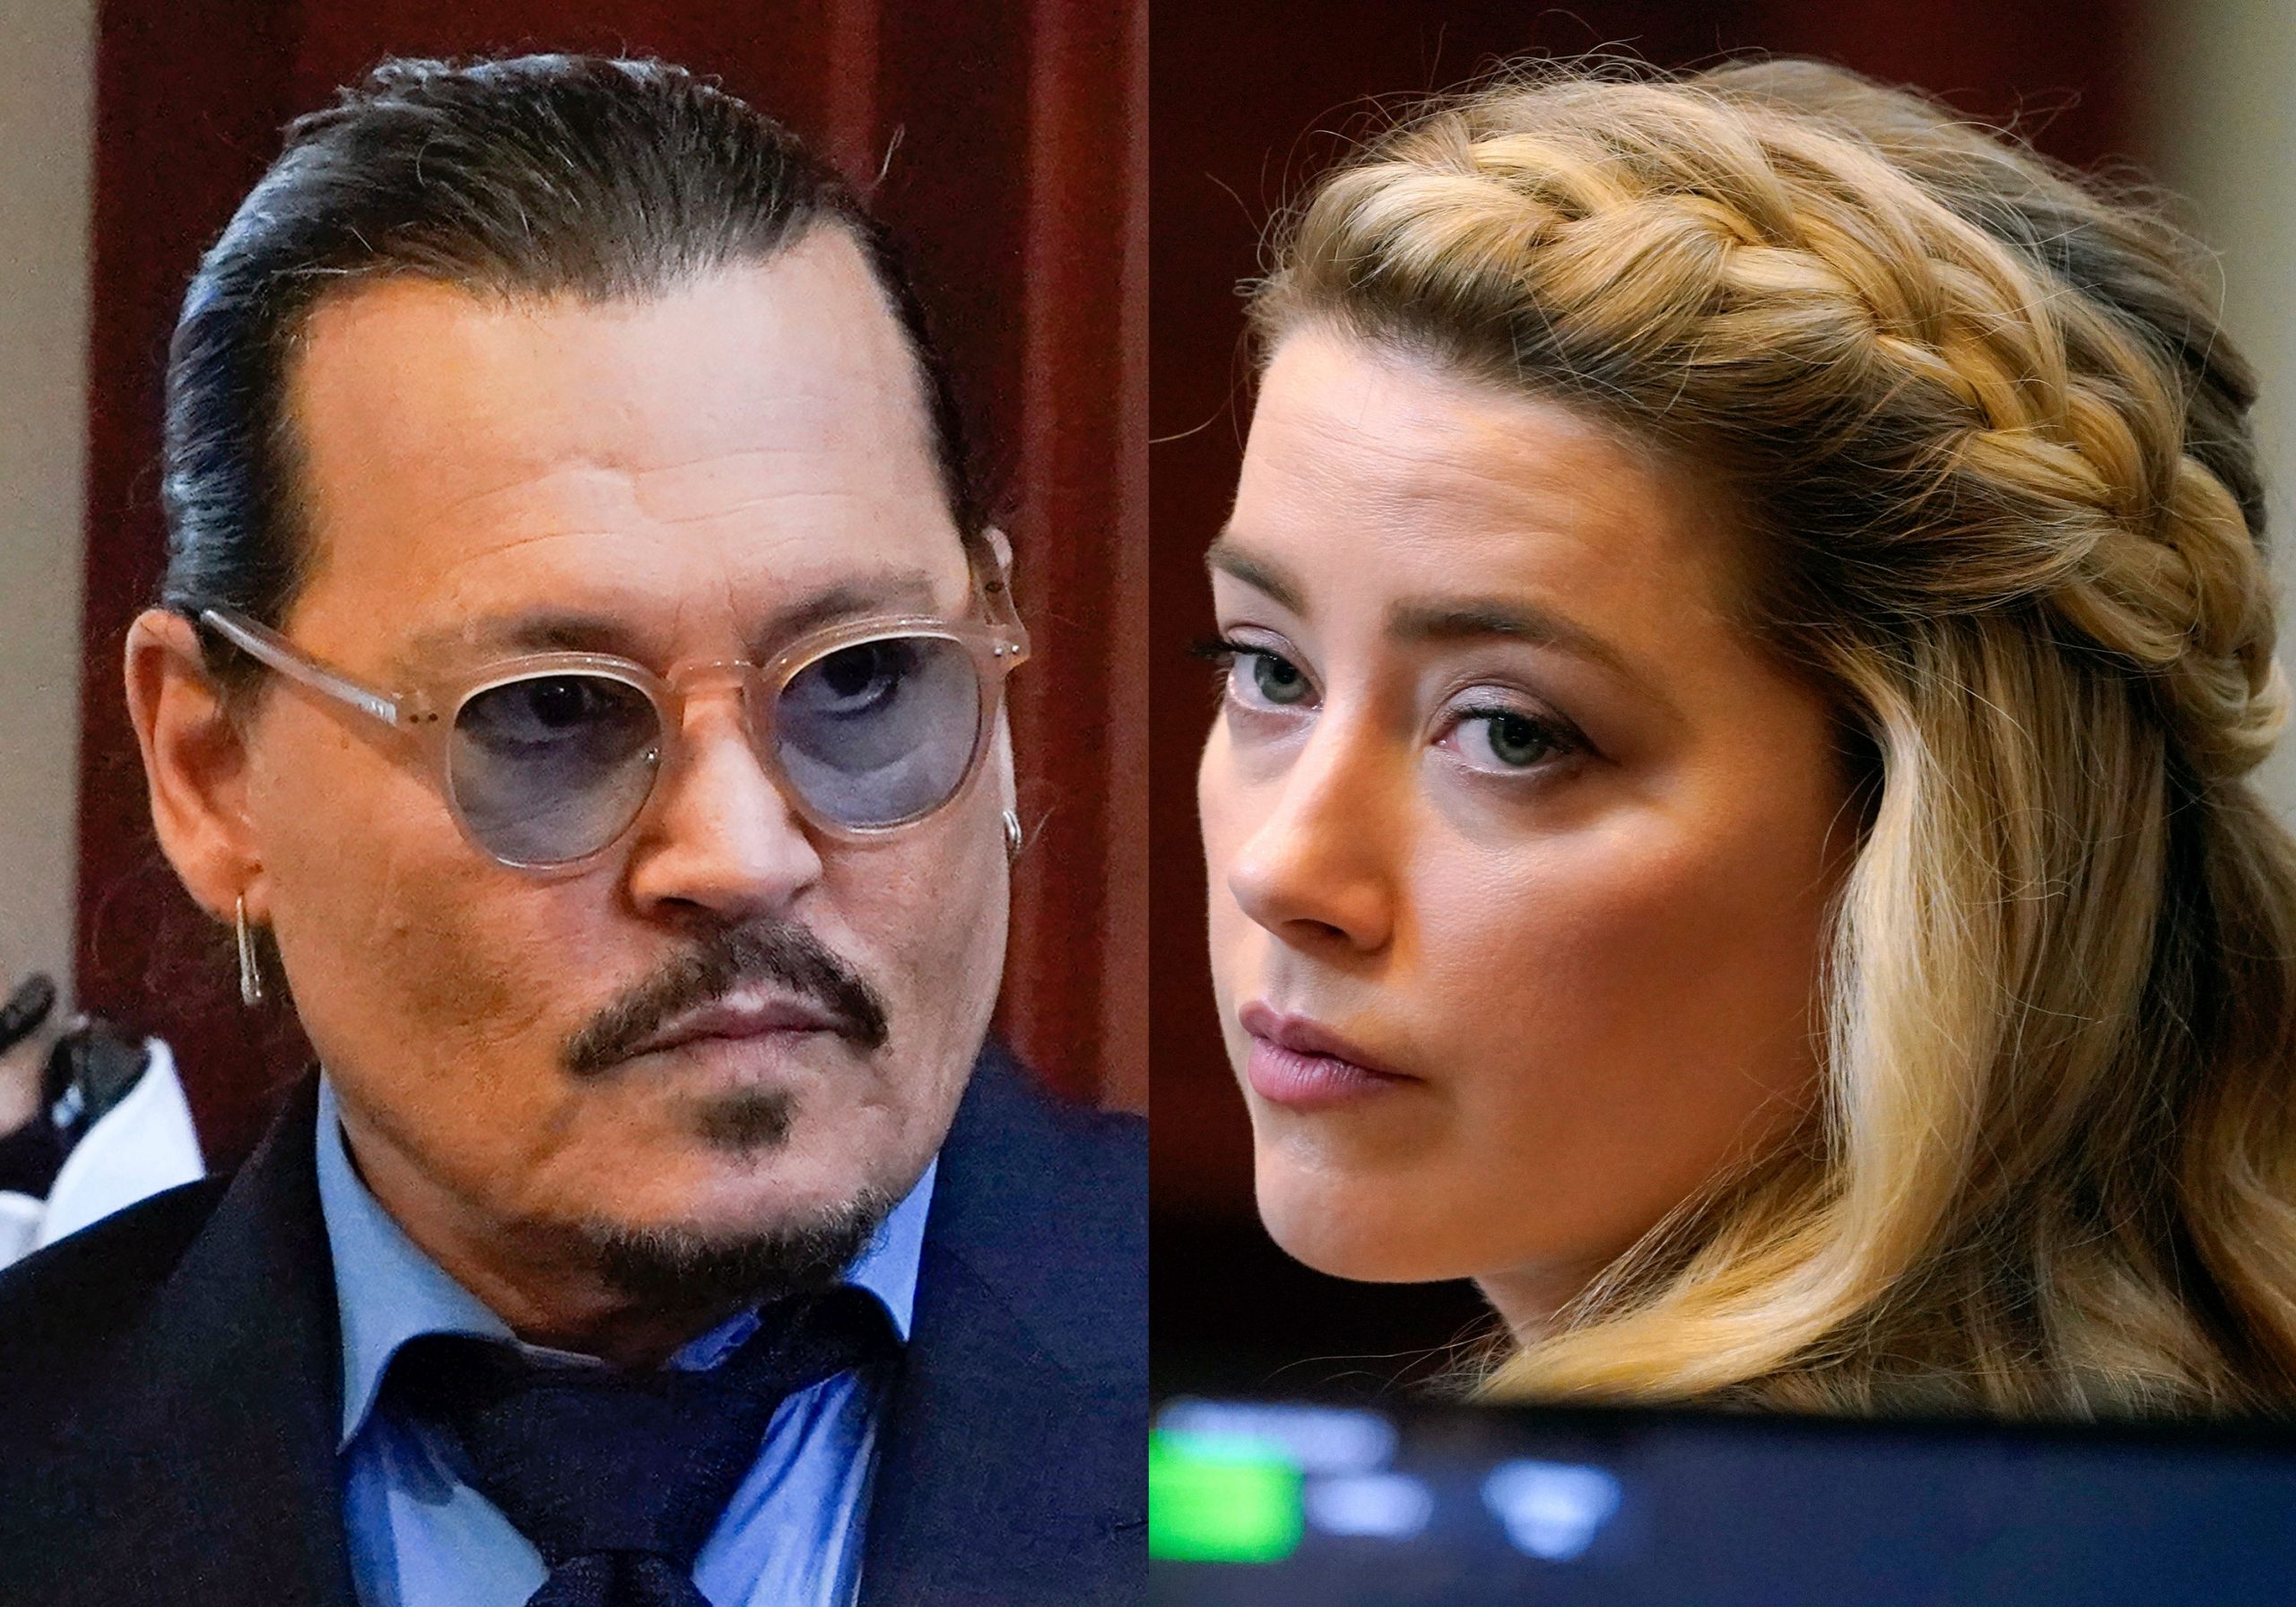 Johnny Depp donates to charity associated with ex-wife Amber Heard